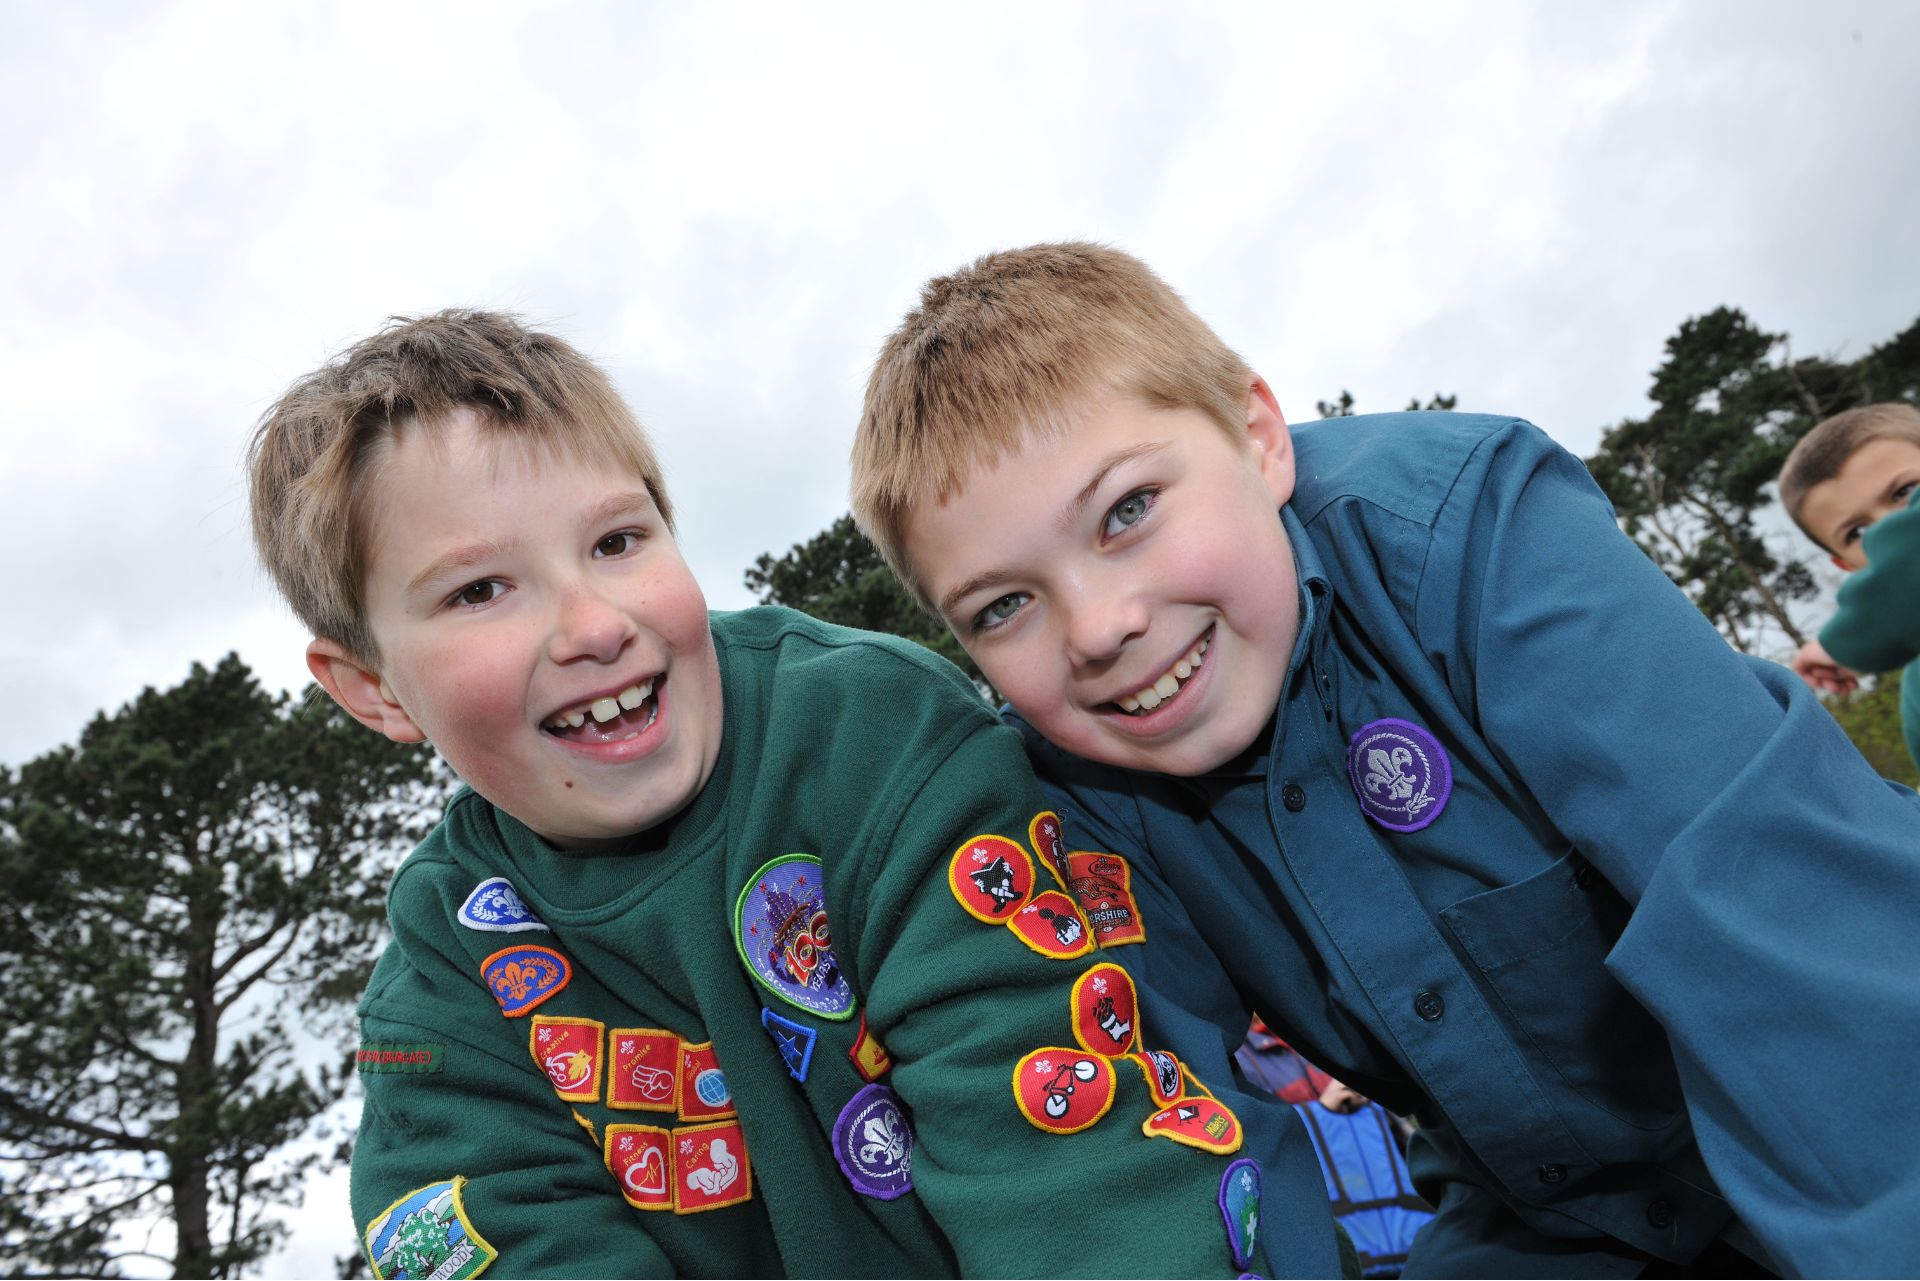 What is the Chief Scout Award?